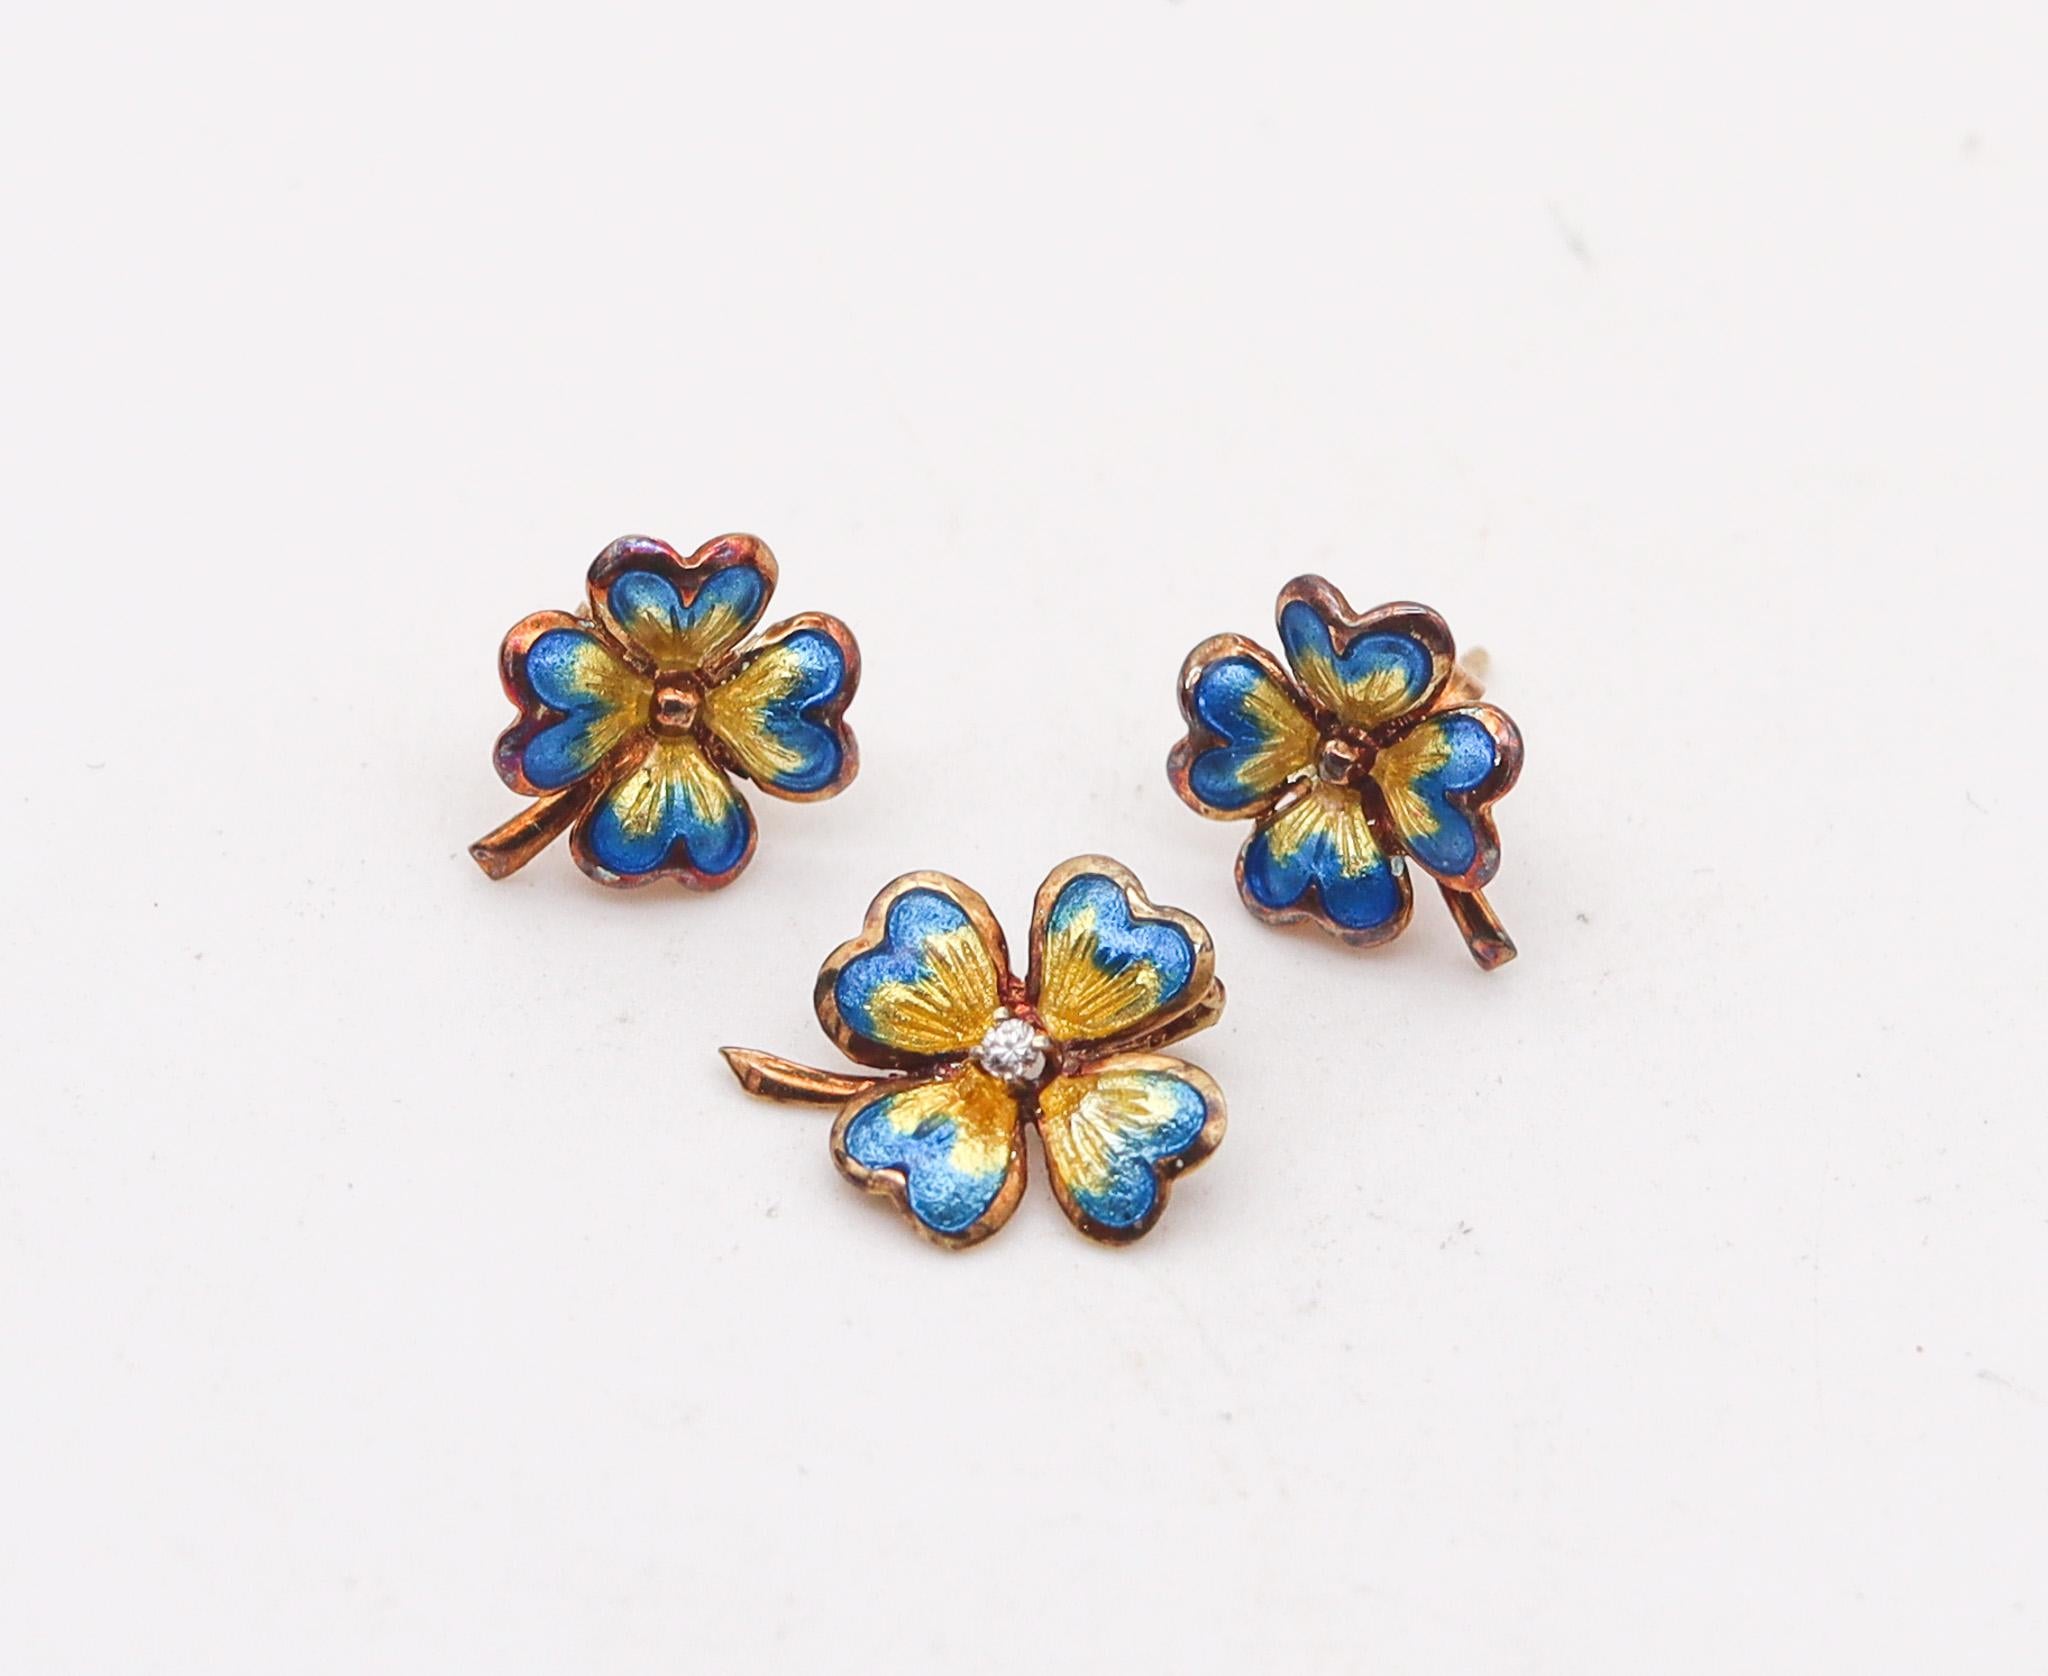 Edwardian 1905 Enameled Flowers Set Pendant And Stud Earrings In 14Kt Gold In Excellent Condition For Sale In Miami, FL